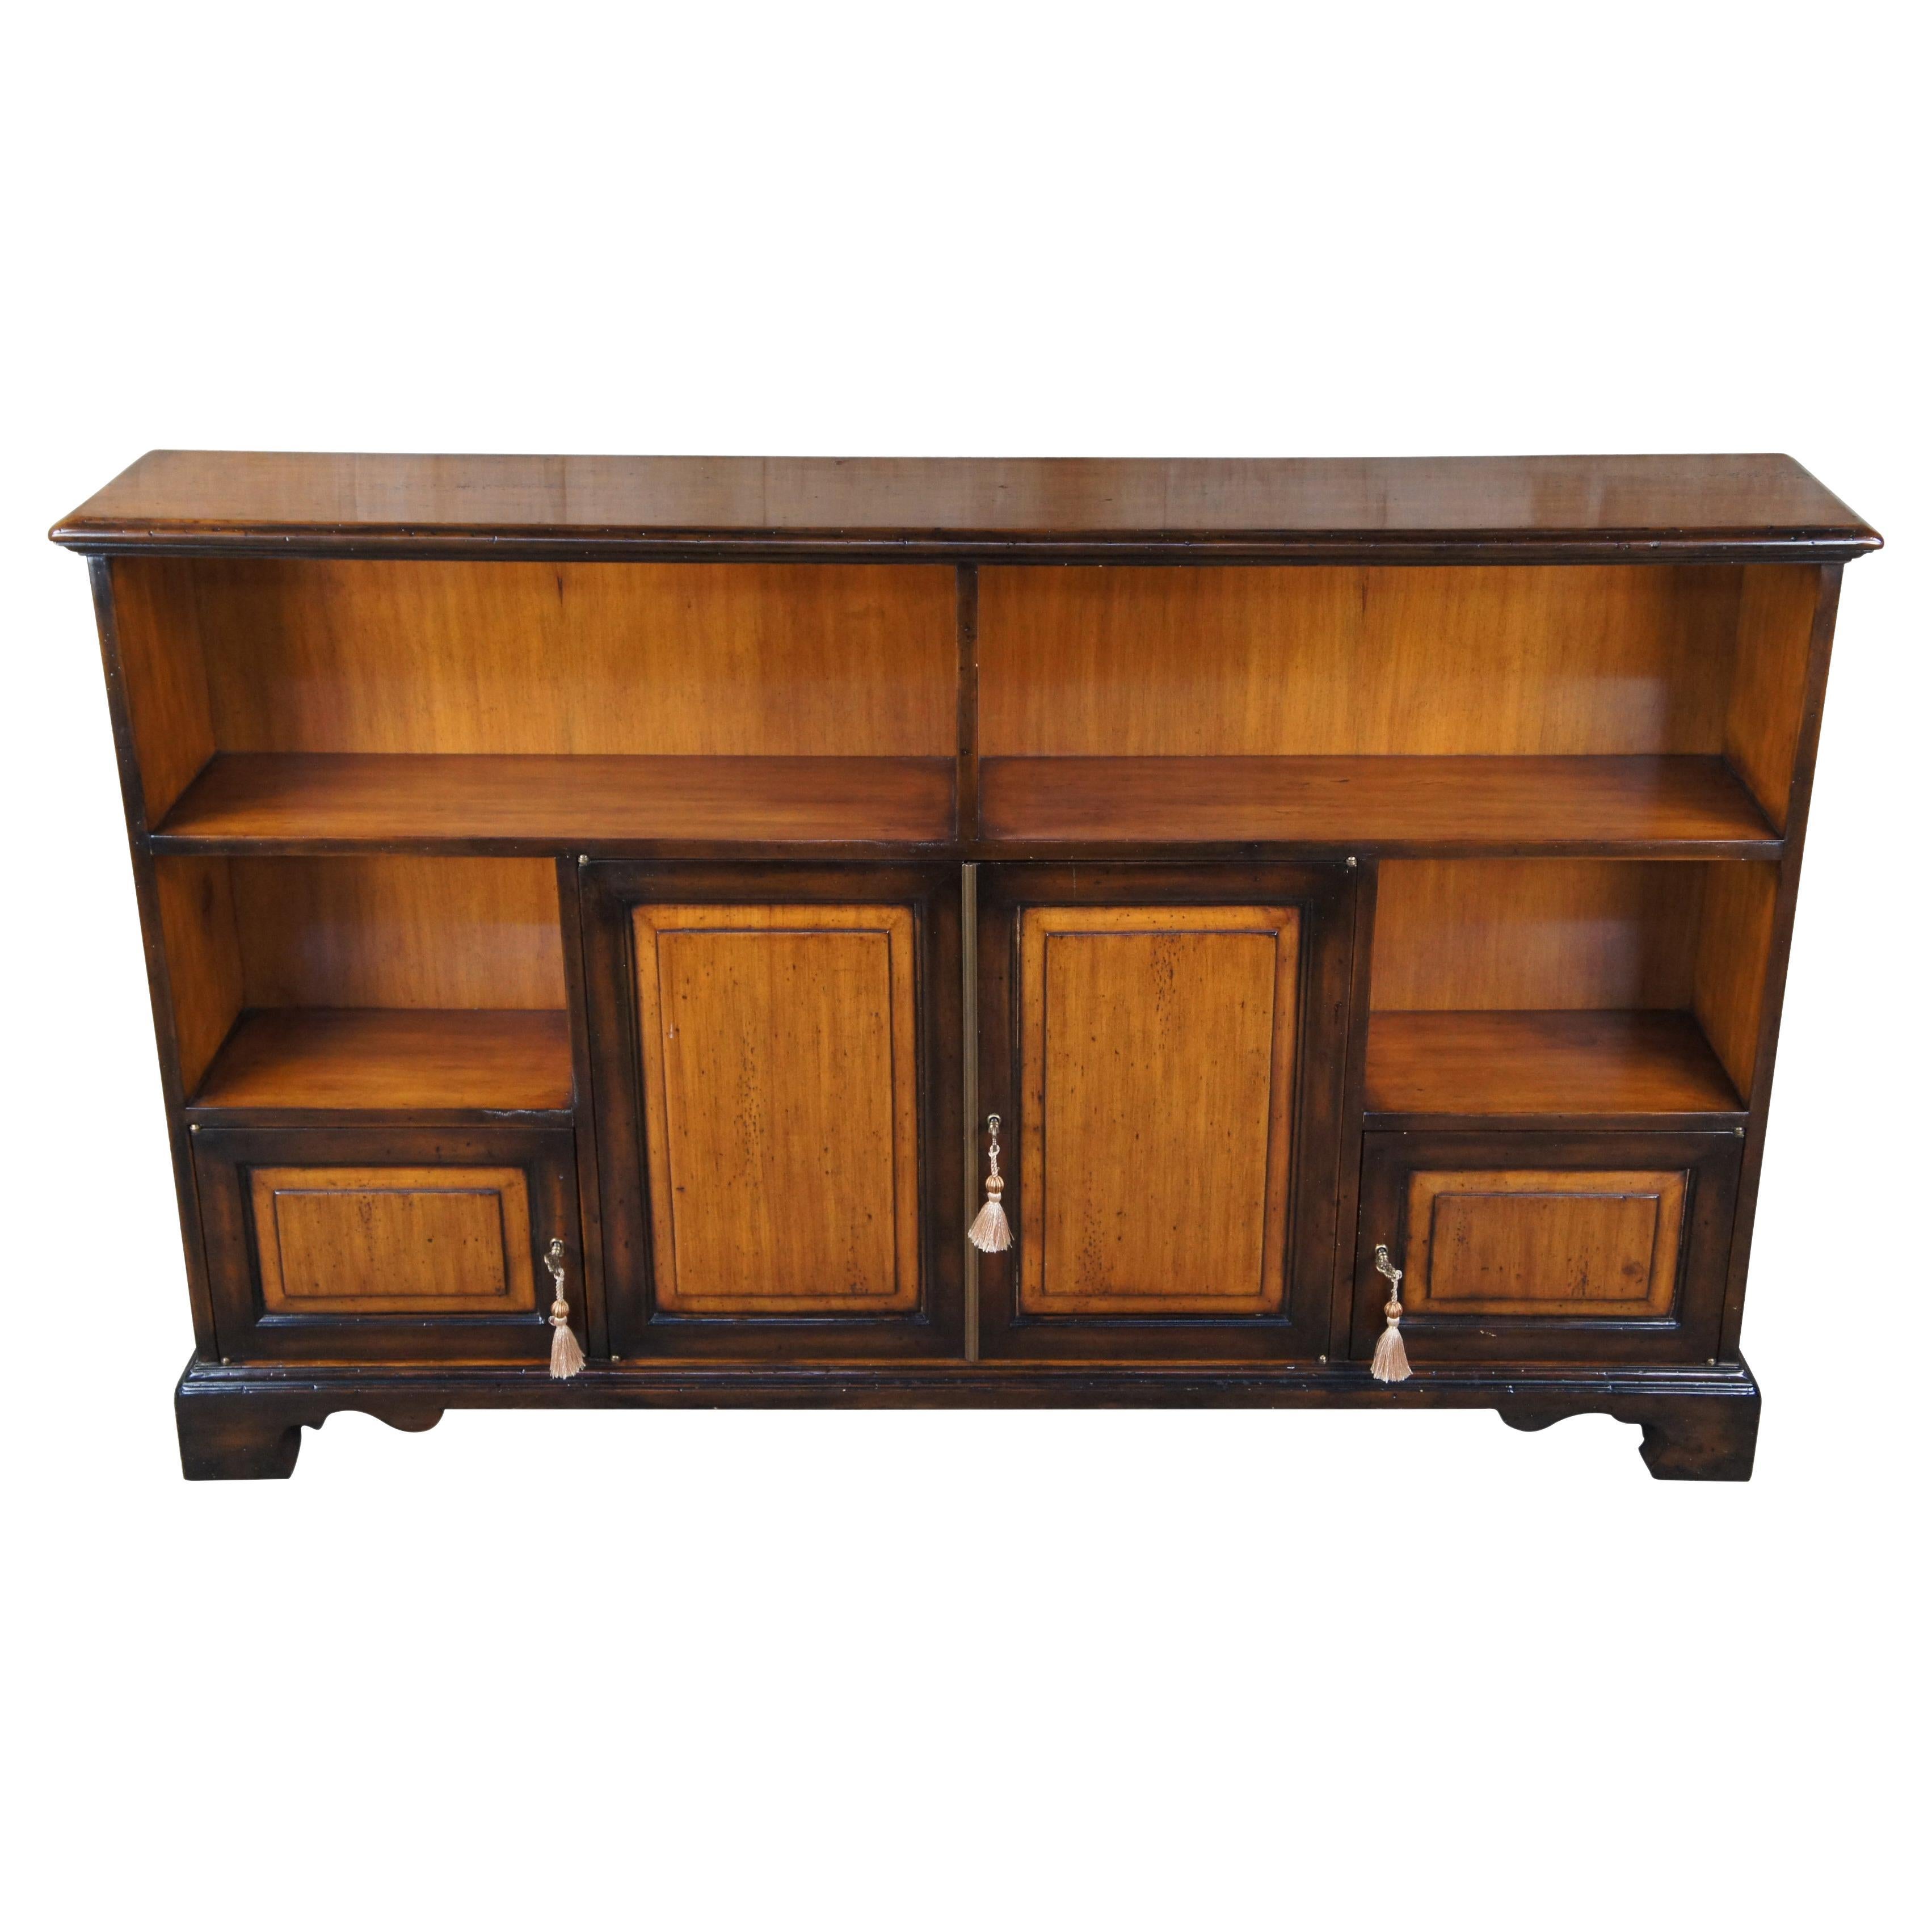 Theodore Alexander Chateau Du Vallois Console Sideboard Bookcase Cabinet For Sale